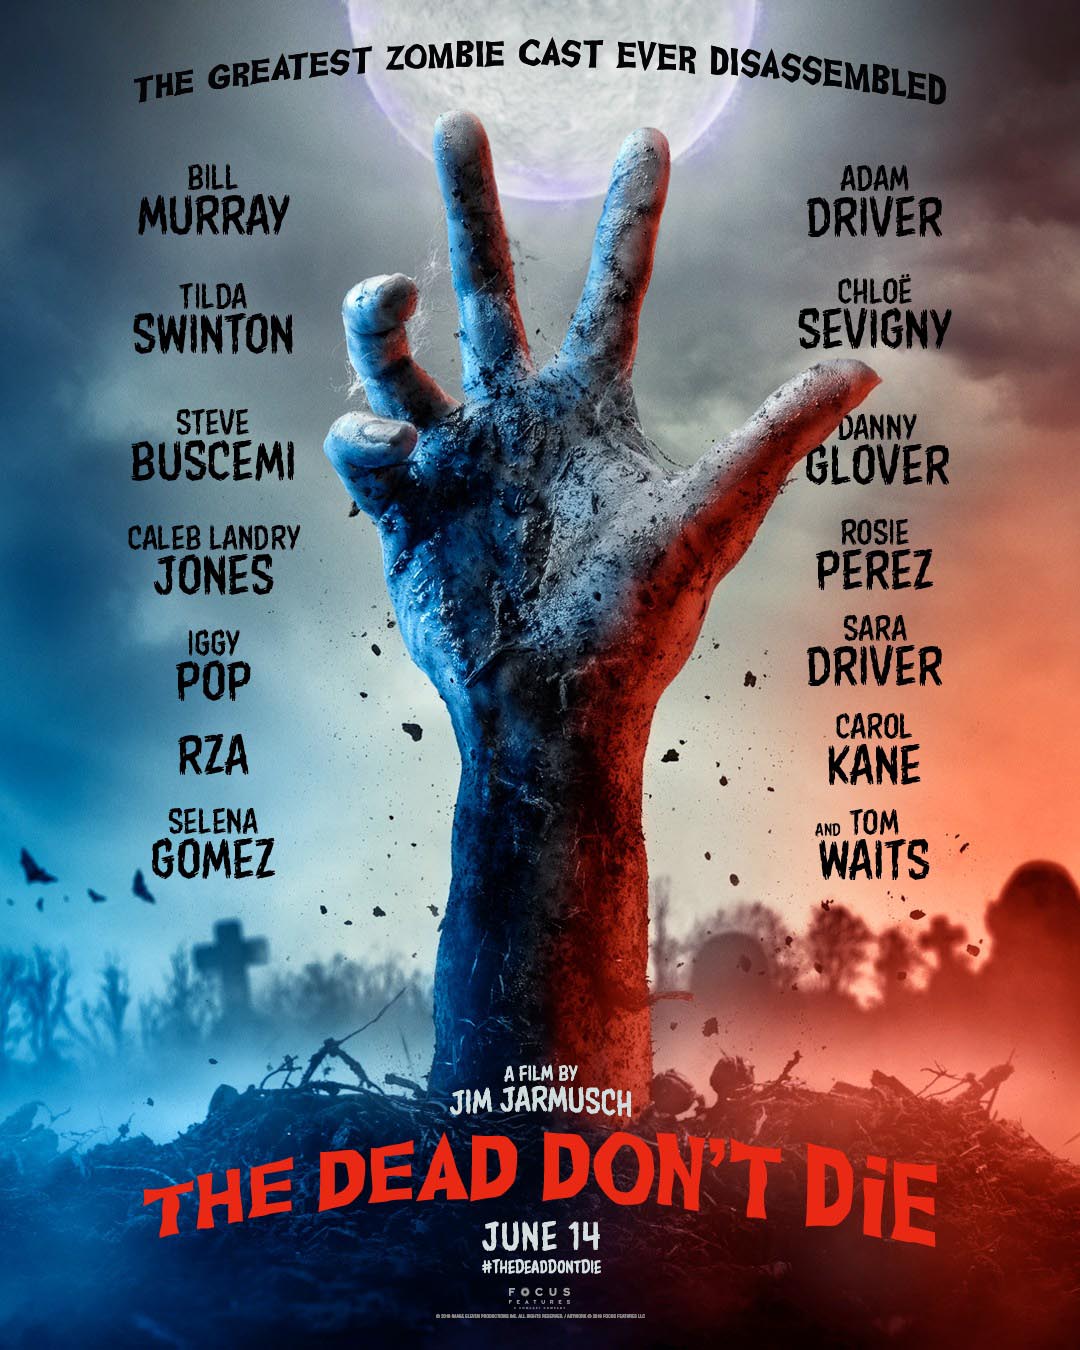 The Dead Don't Die comedy horror (2019) Movie Free Online